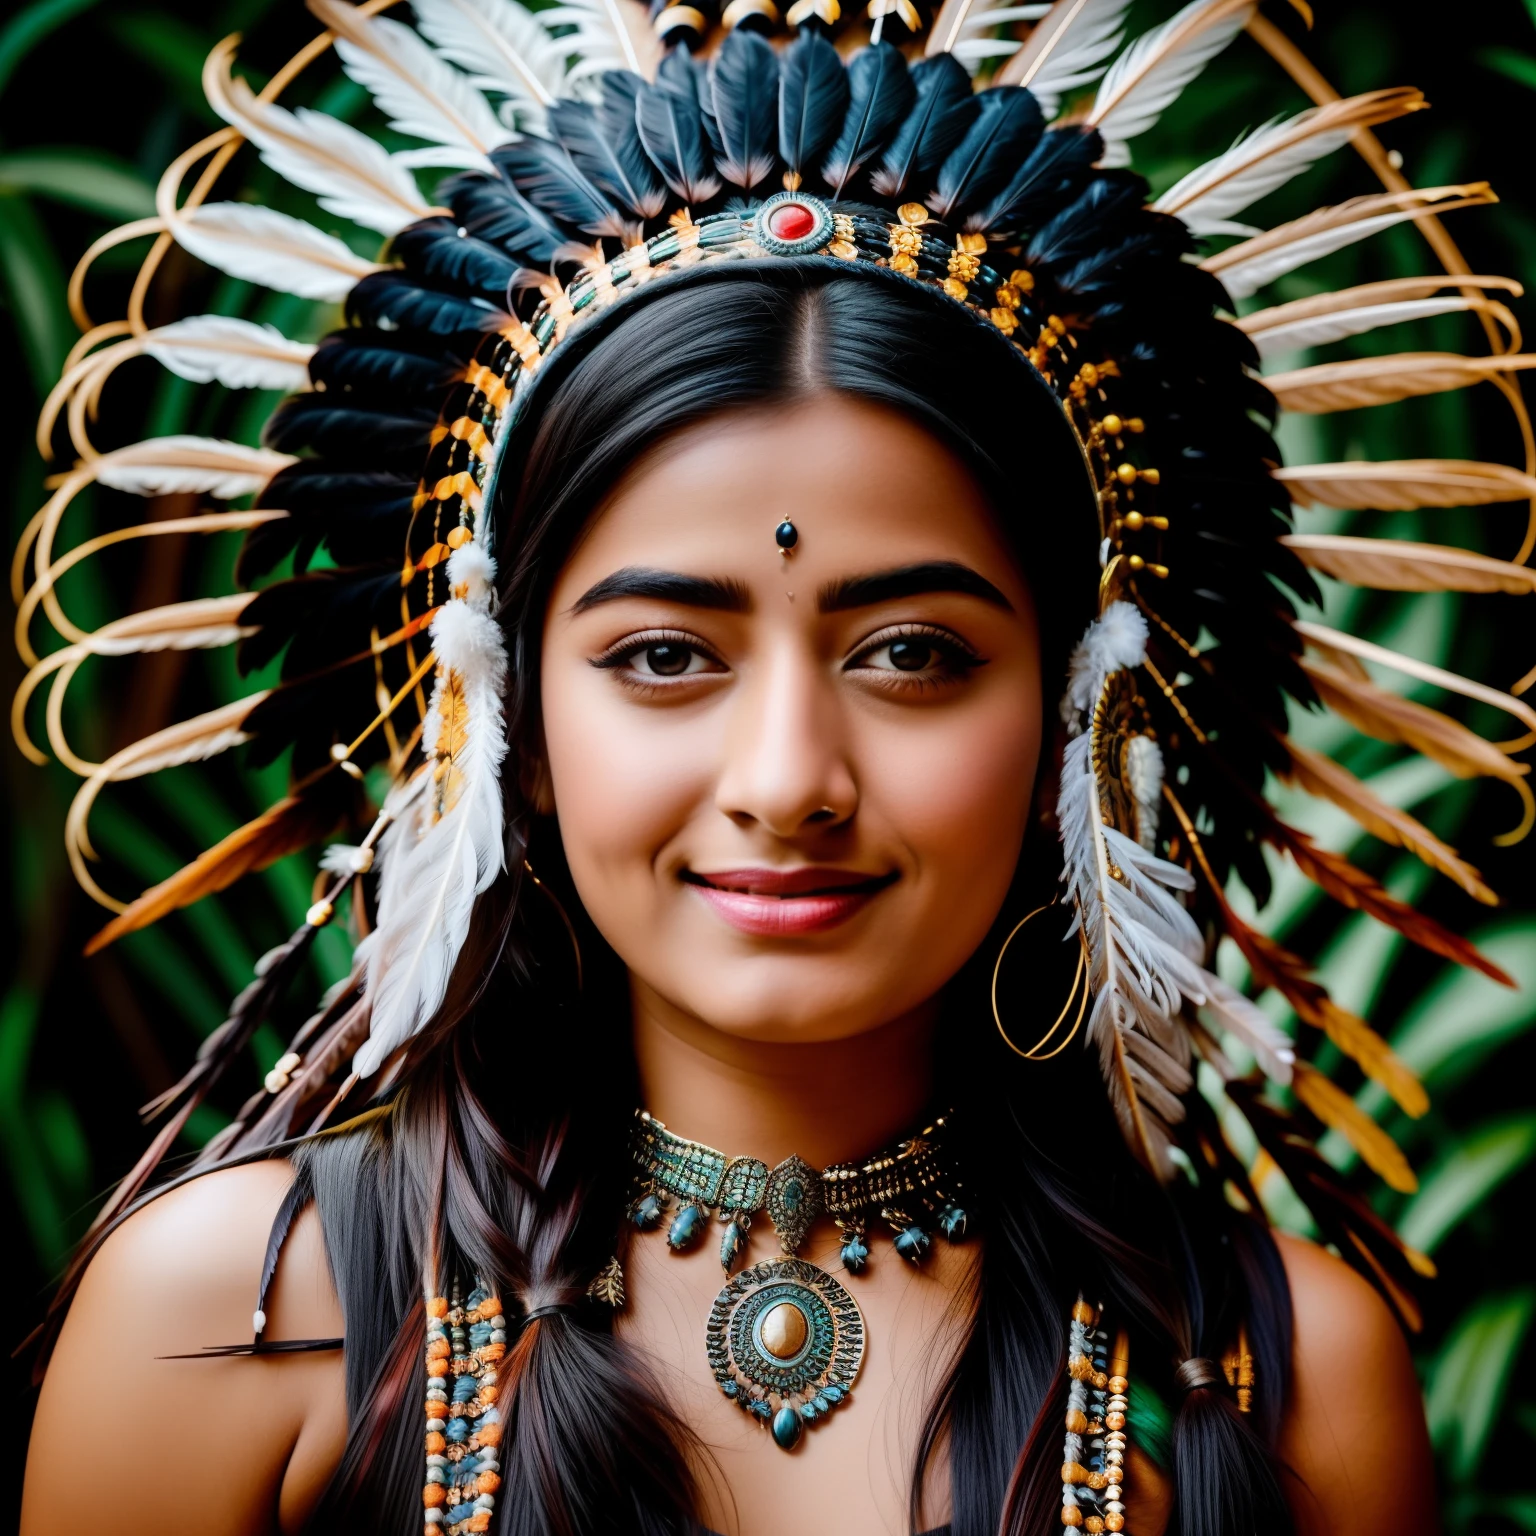 {{{cute rashmika}}} young woman wearing a feather headdress and a feather mask, she is dressed in shaman clothes, elaborate costume, feathered headdress, headdress, ornate headdress, centered headdress, native american, aztec princess portrait, beautiful costume, indian warrior, native american warrior, american indian headdress, : native american shamen fantasy, wearing crown of bright feathers